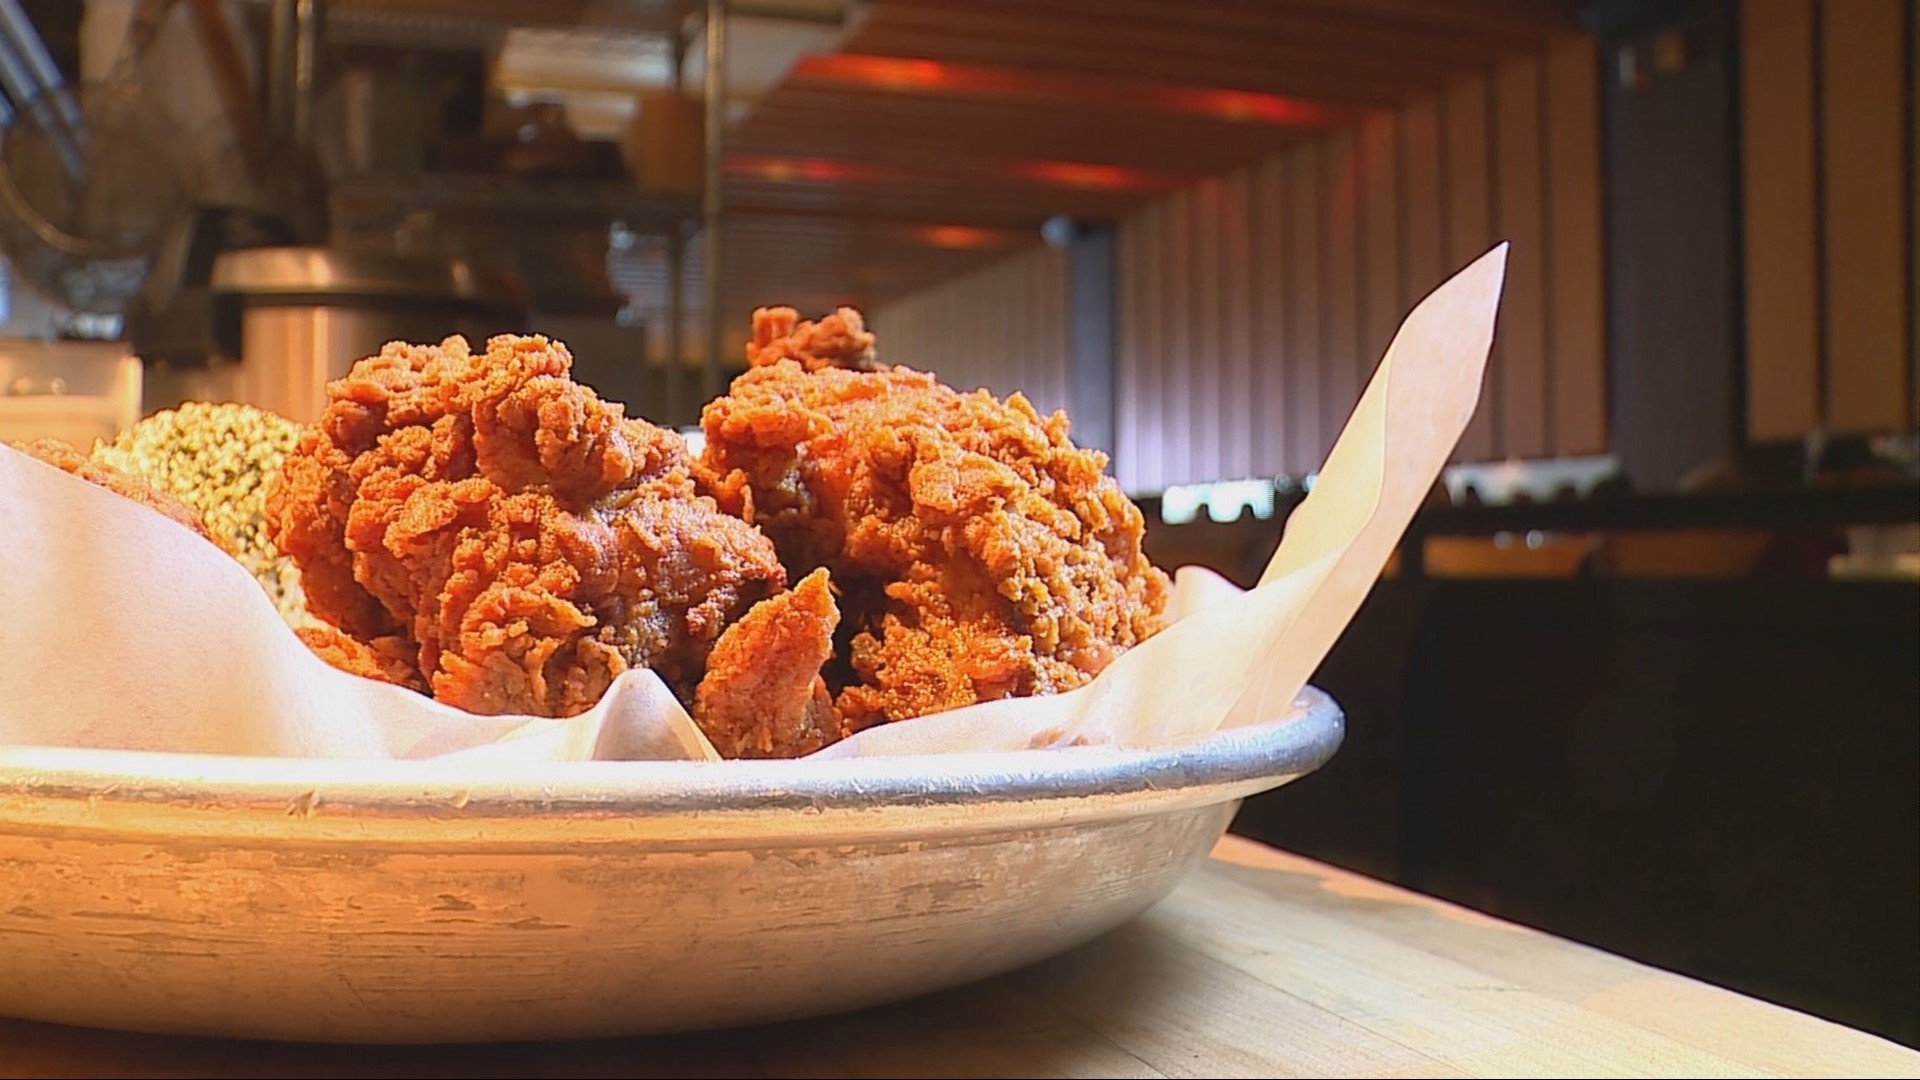 We did the grueling research, now enjoy our list for some of the best fried chicken in Seattle. #k5evening